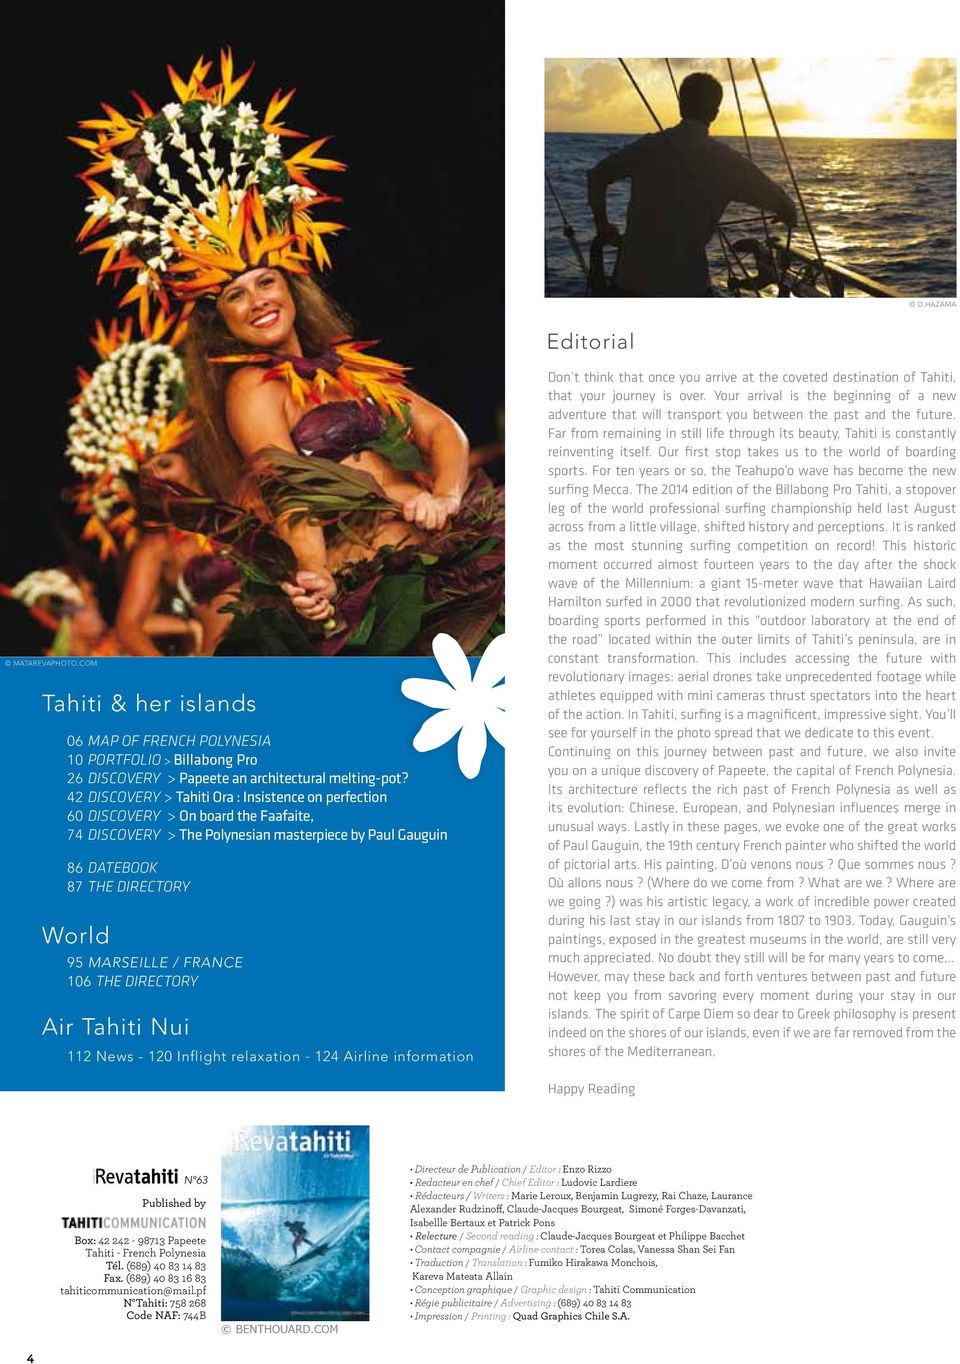 FRANCE 106 THE DIRECTORY Air Tahiti Nui 112 News - 120 Inflight relaxation - 124 Airline information Don t think that once you arrive at the coveted destination of Tahiti, that your journey is over.